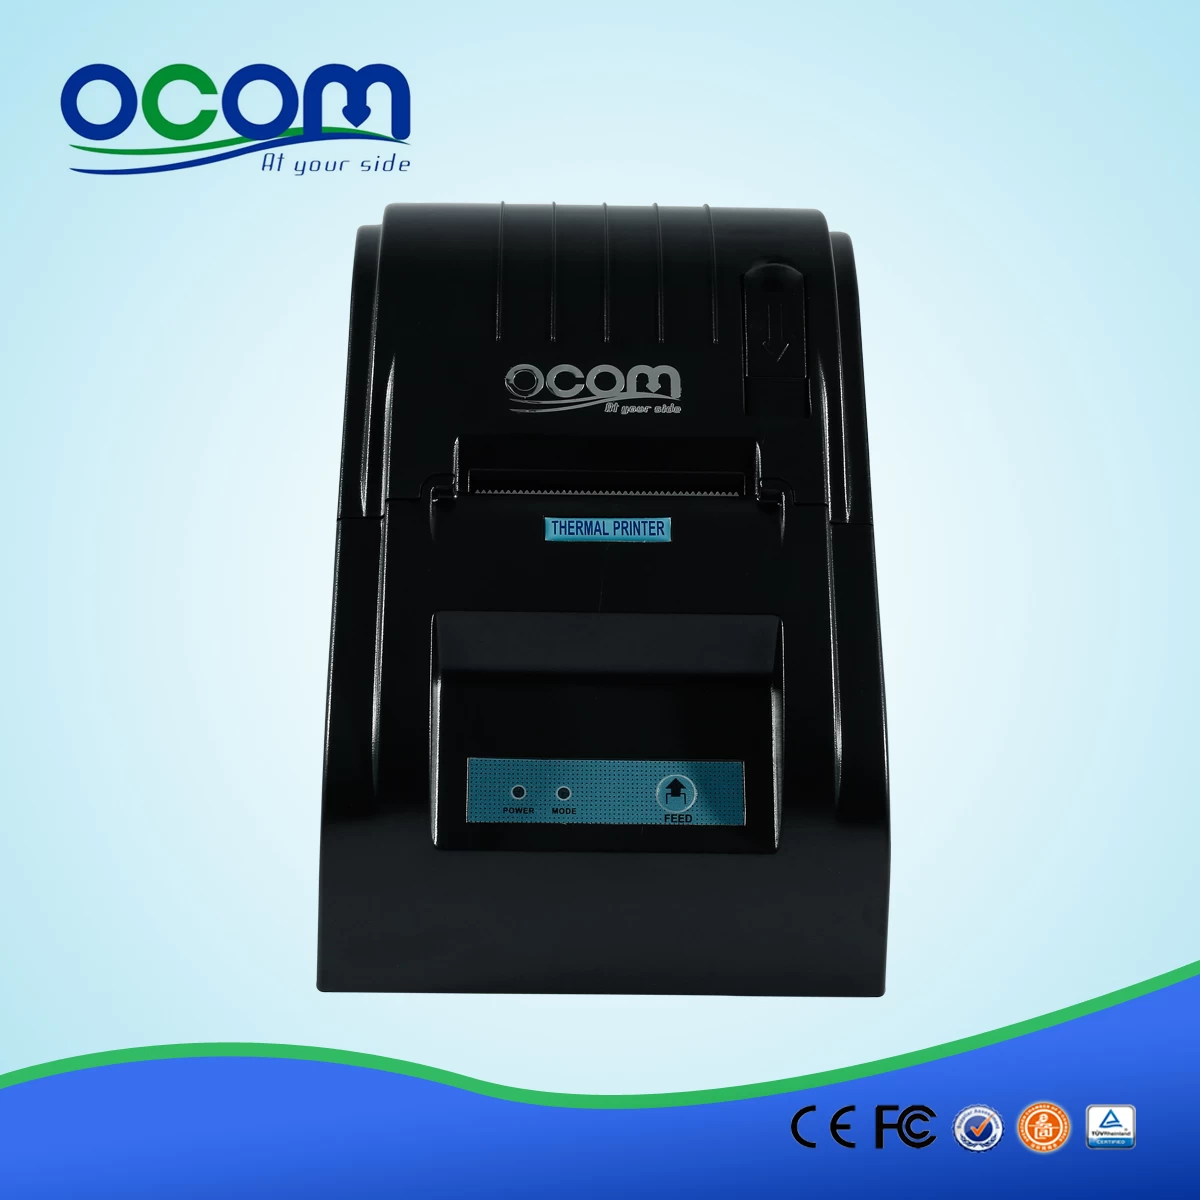 OCPP-585 58mm USB Thermal Receipt Printer With Driver